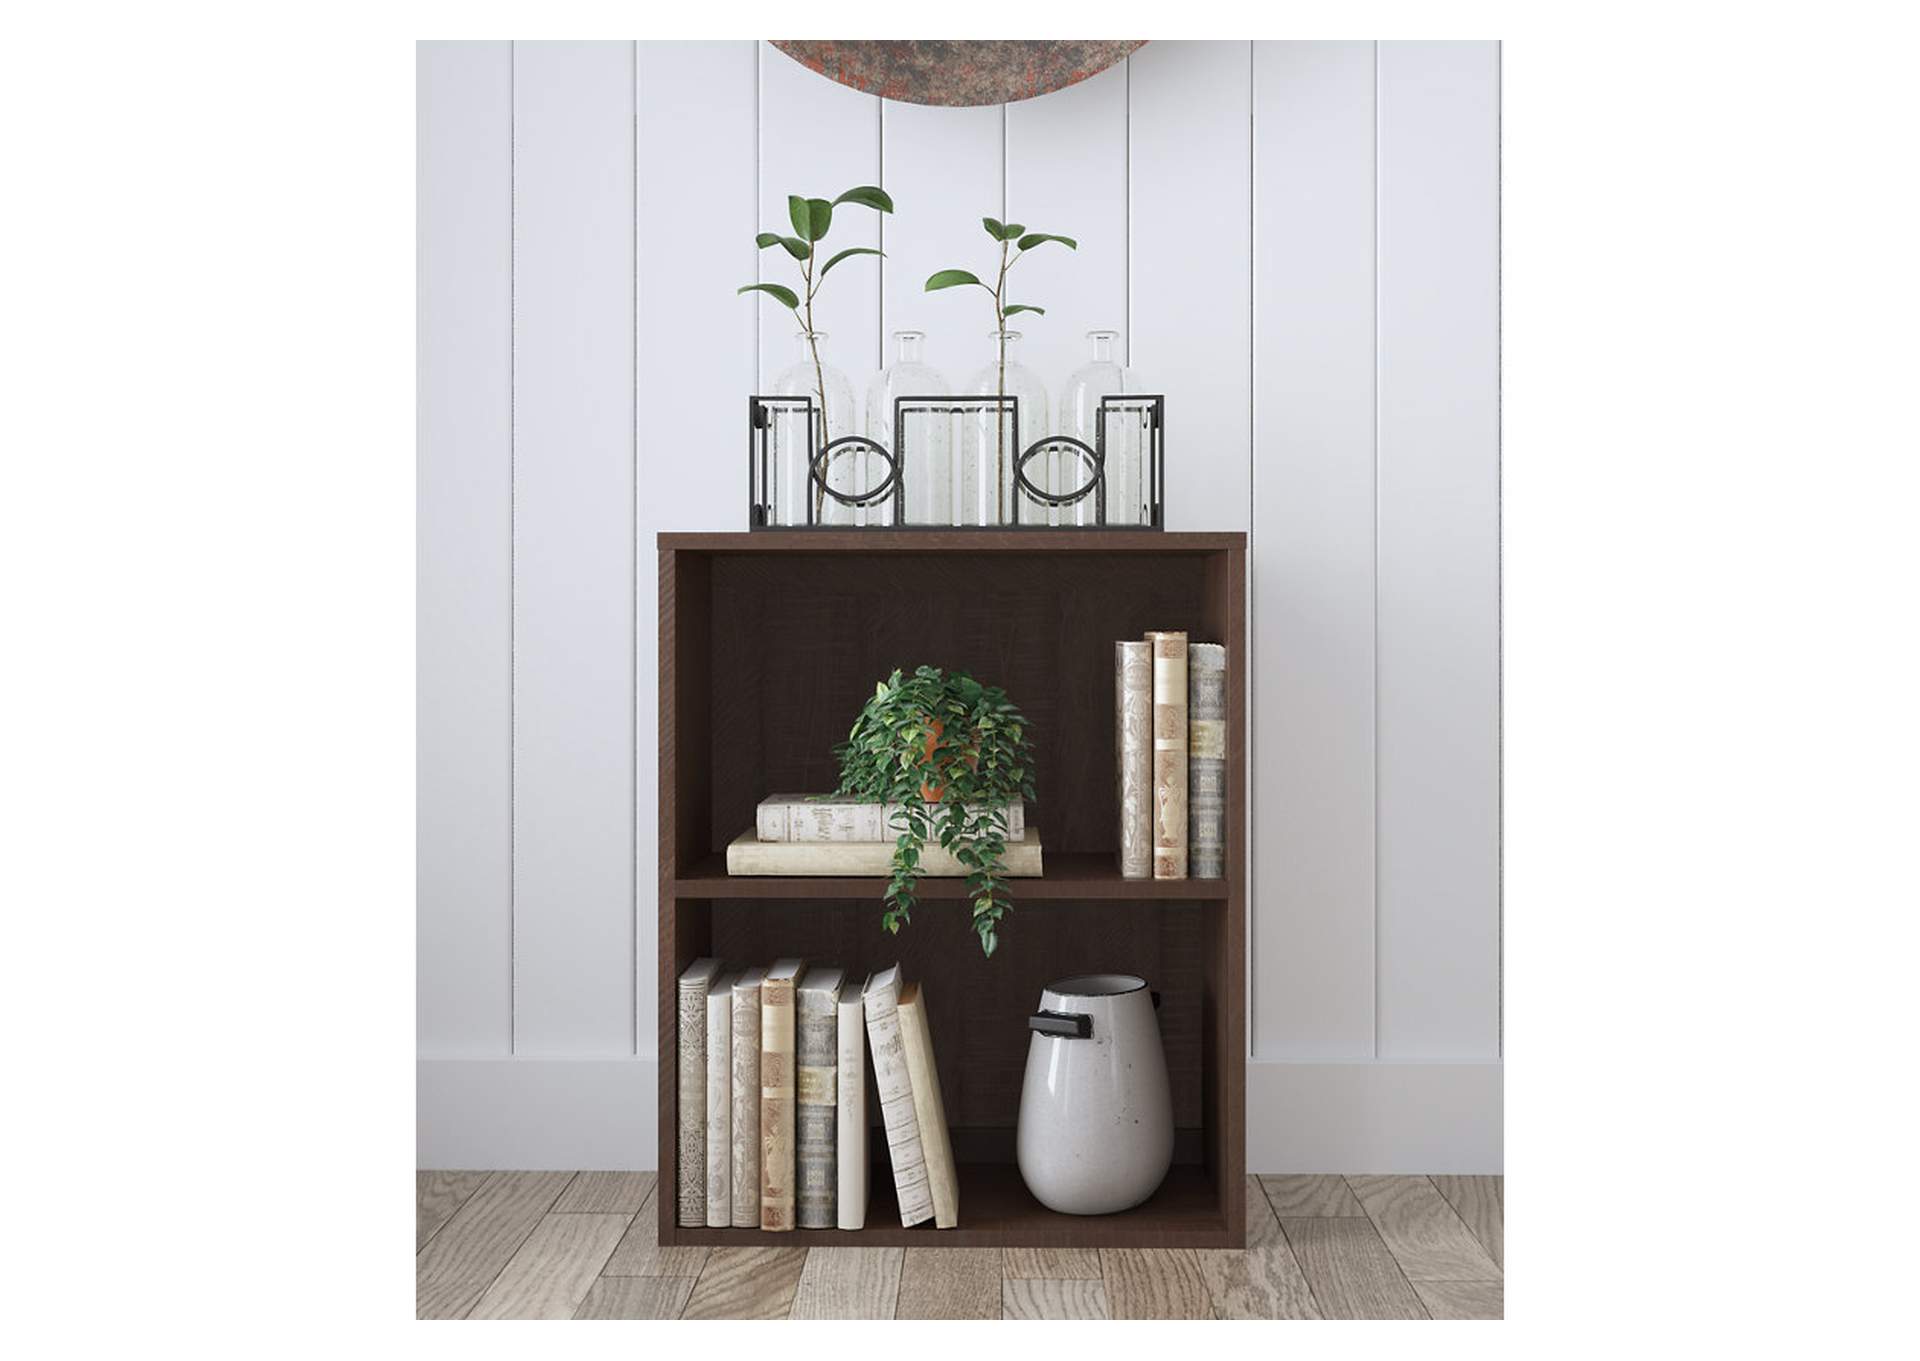 Camiburg 30" Bookcase,Direct To Consumer Express